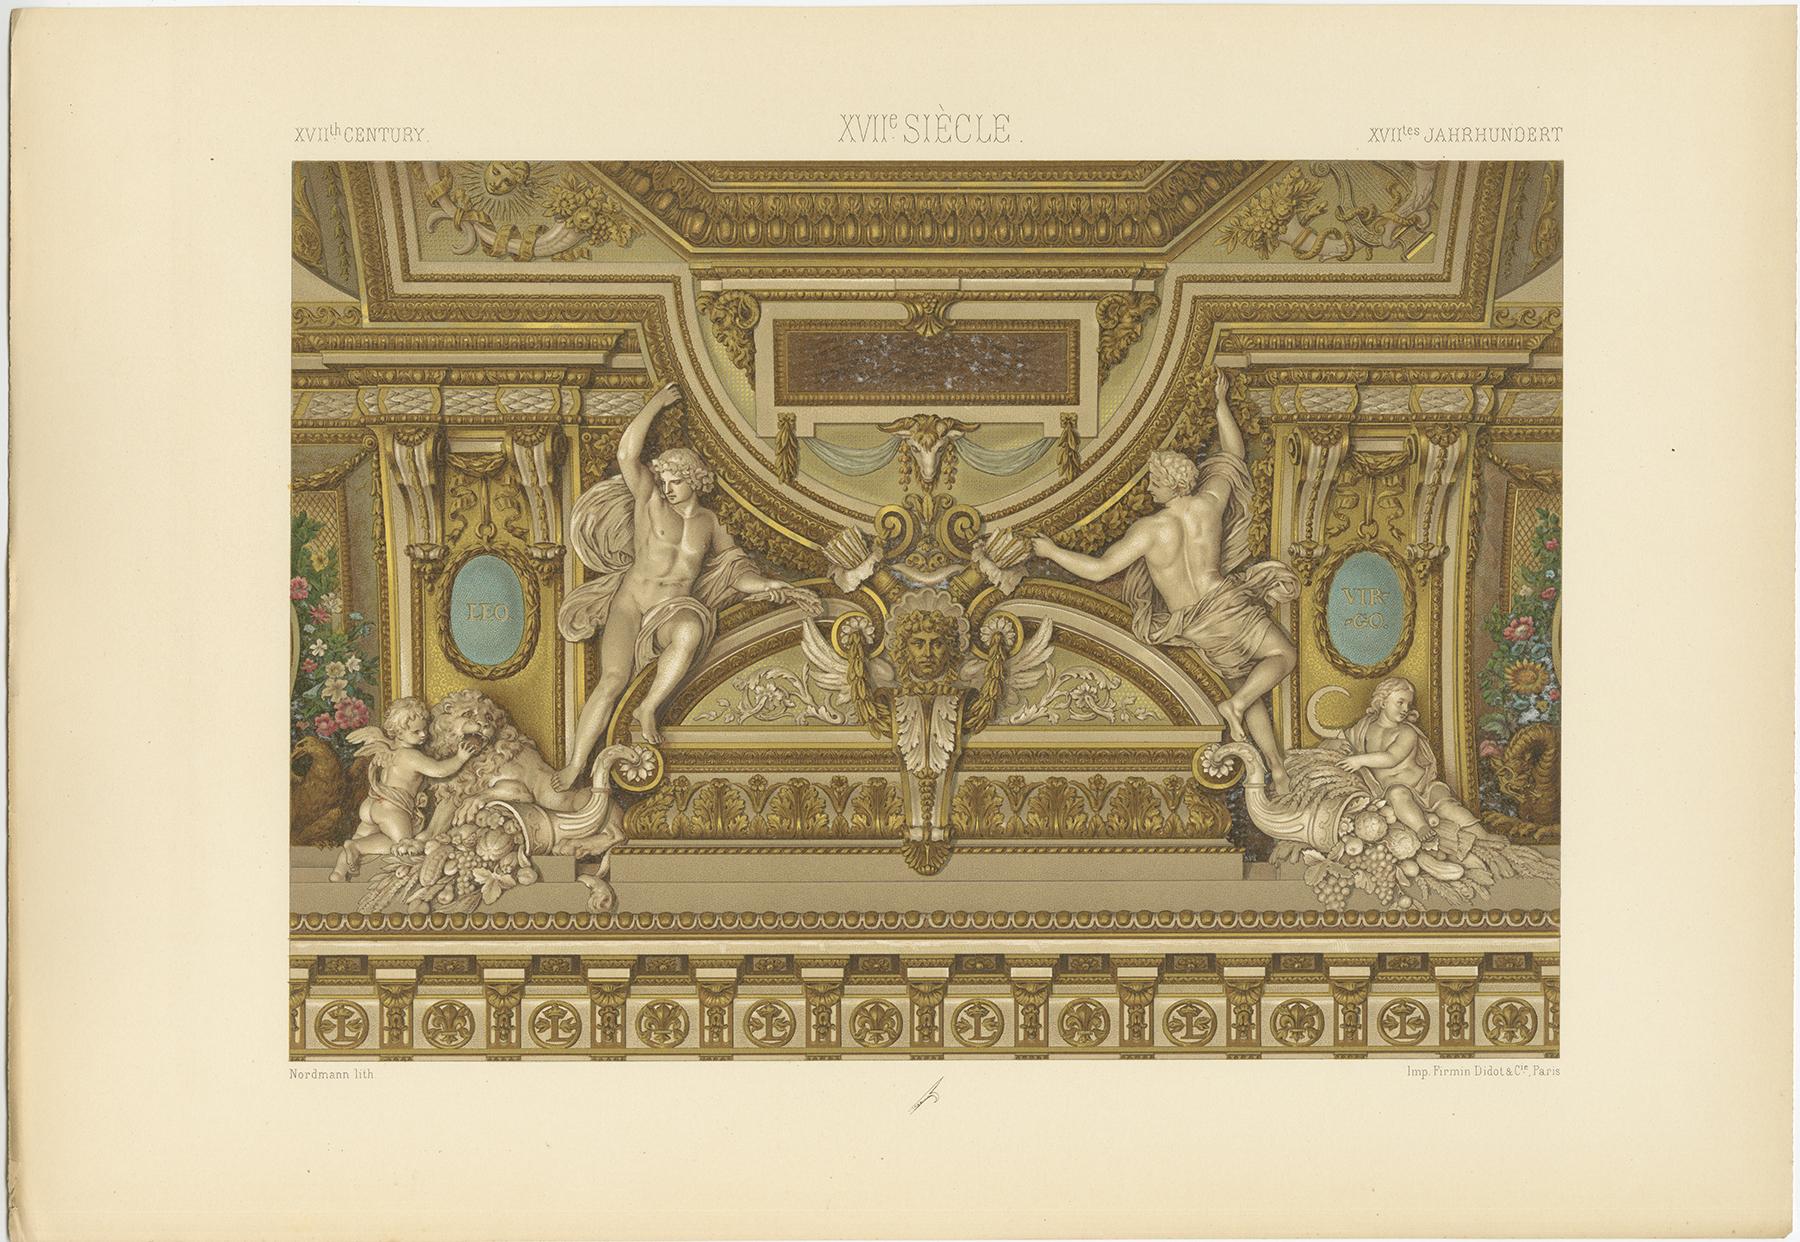 Antique print titled '17th Century - XVIIc Siècle - XVIILes Jahrhundert'. Chromolithograph of from a carved and painted ceiling vault by Charles Le Brun in the Louvre ornaments. This print originates from 'l'Ornement Polychrome' by Auguste Racinet.